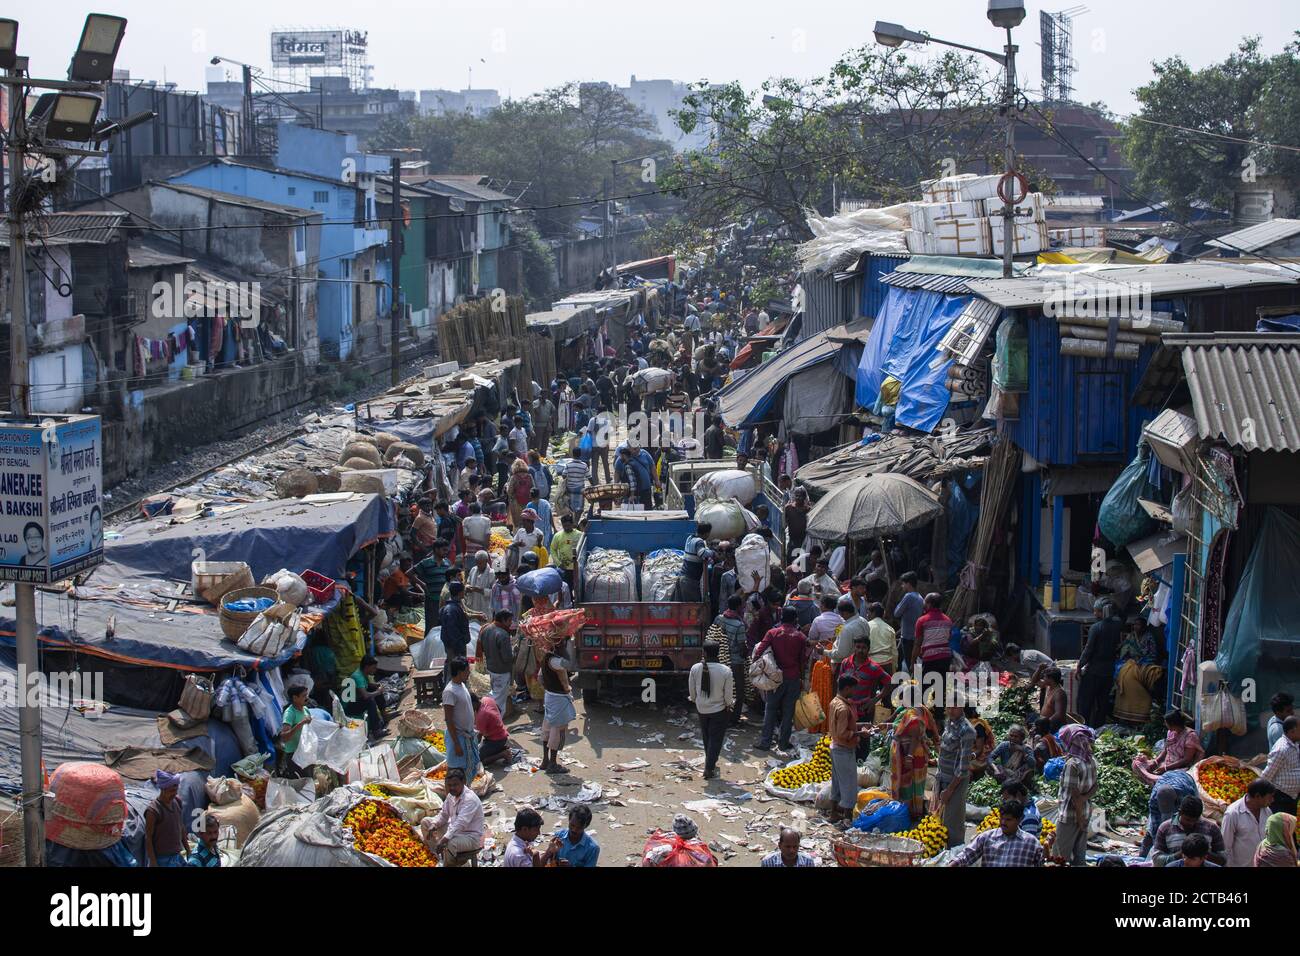 Kolkata, India - February 2, 2020: Unidentified people attends Mallick Ghat flower market by Howrah bridge next to a railroad on February 2, 2020 Stock Photo